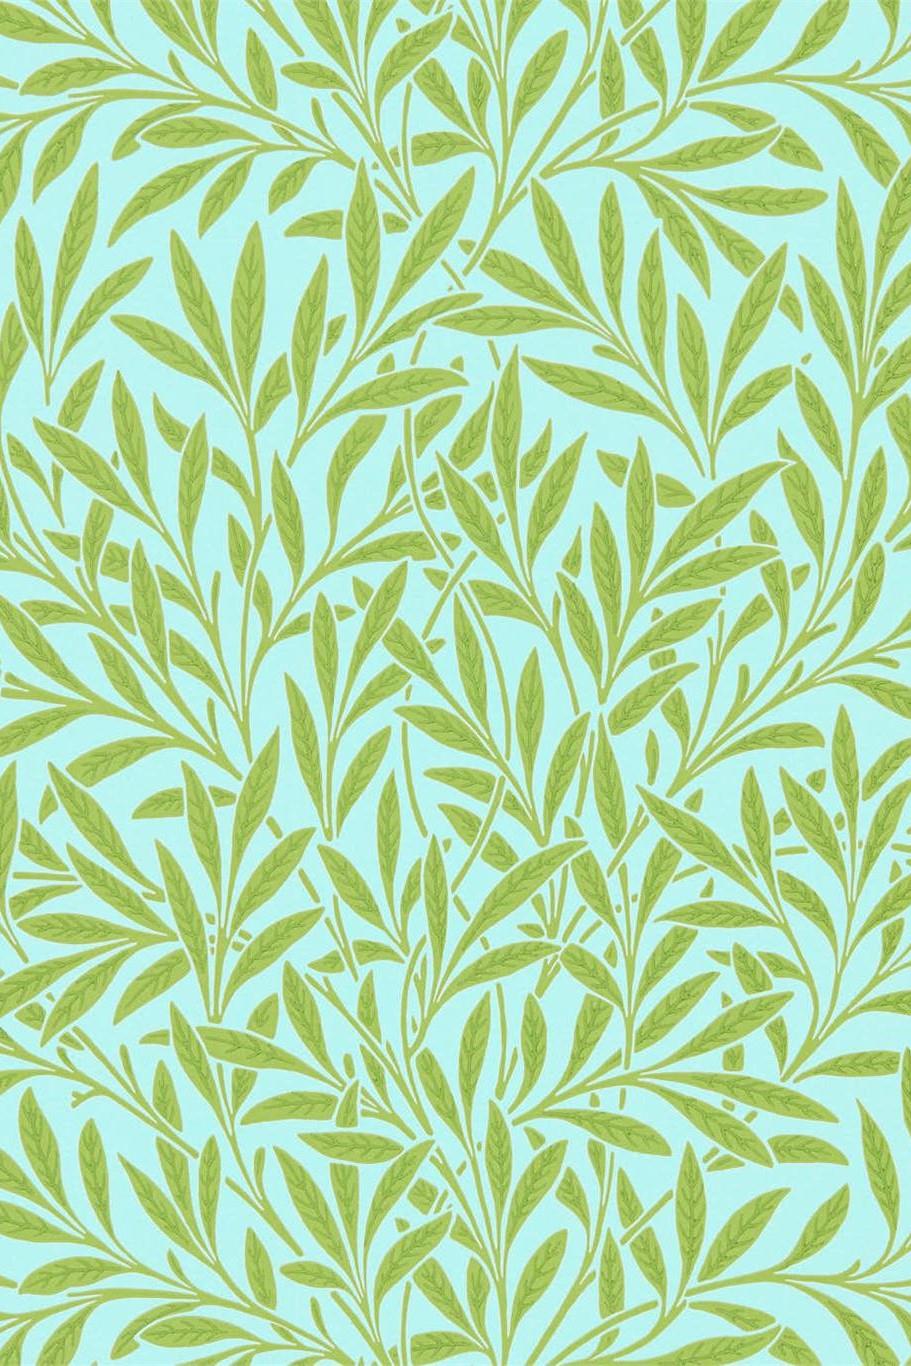 morris-co-queen-square-willow-wallpaper-dbpw216964